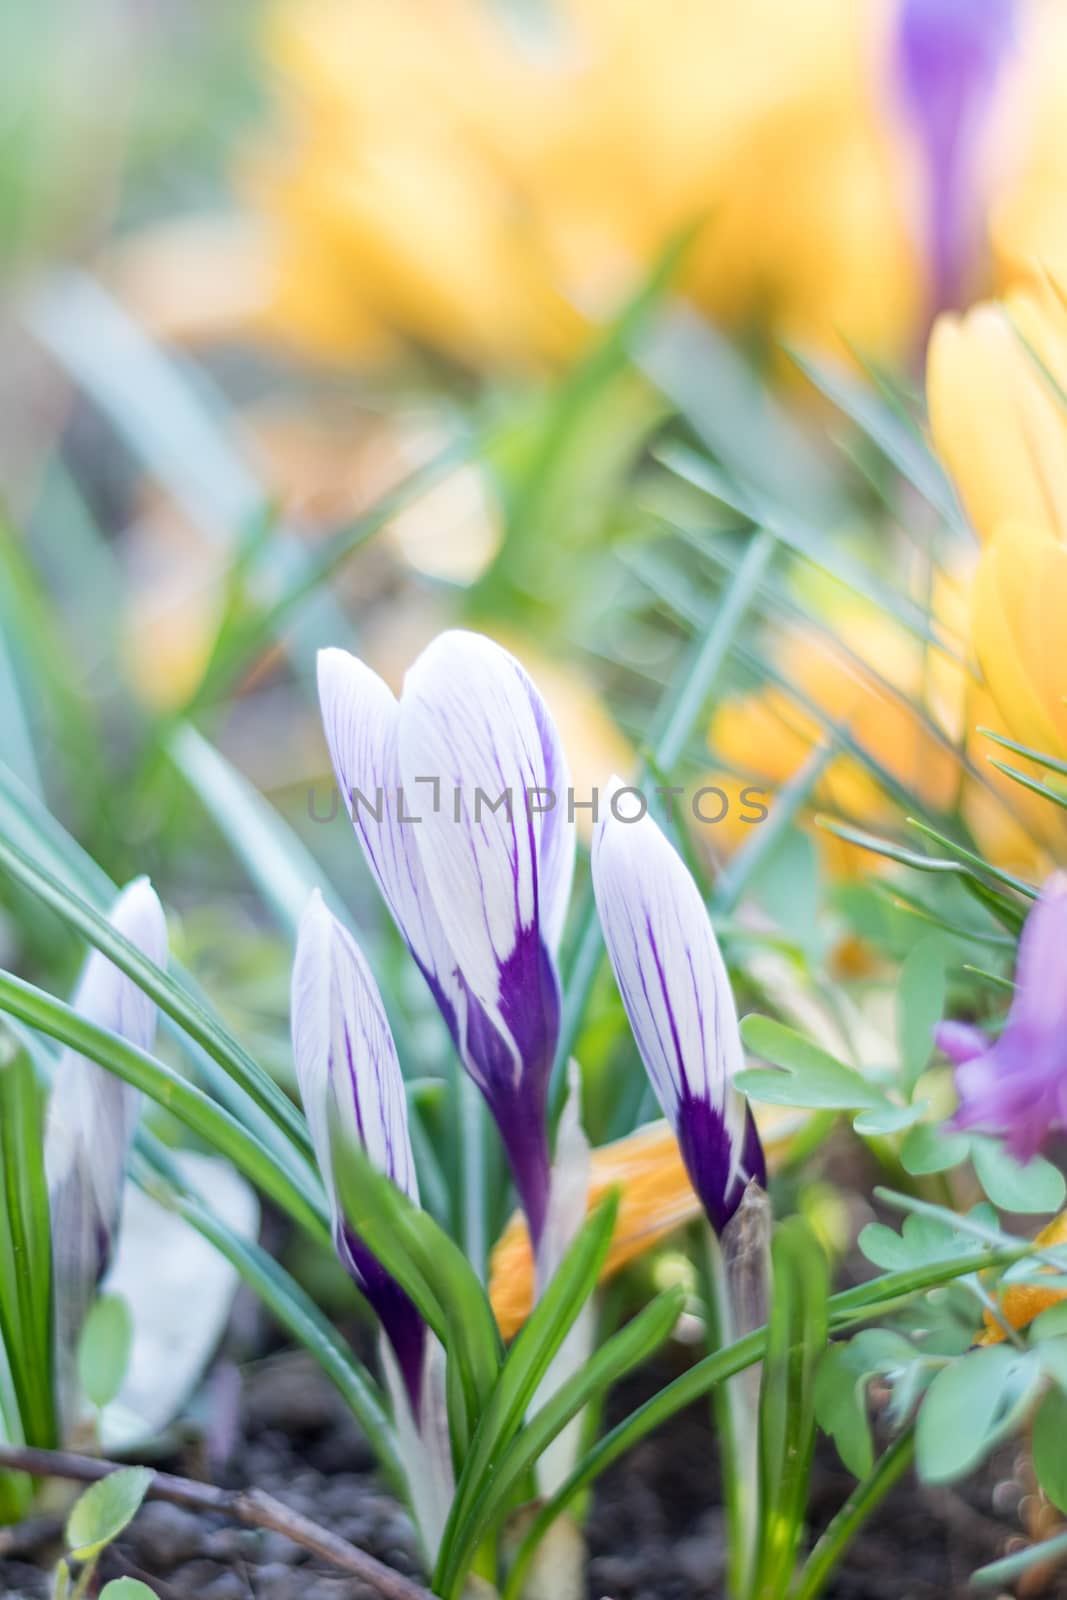 Sunny spring forest under sunbeams with beautiful spring violet white and yellow flowers crocuses. Easter, valentine, mothers day picture with bokeh background. Copy space, shallow depth of the field.